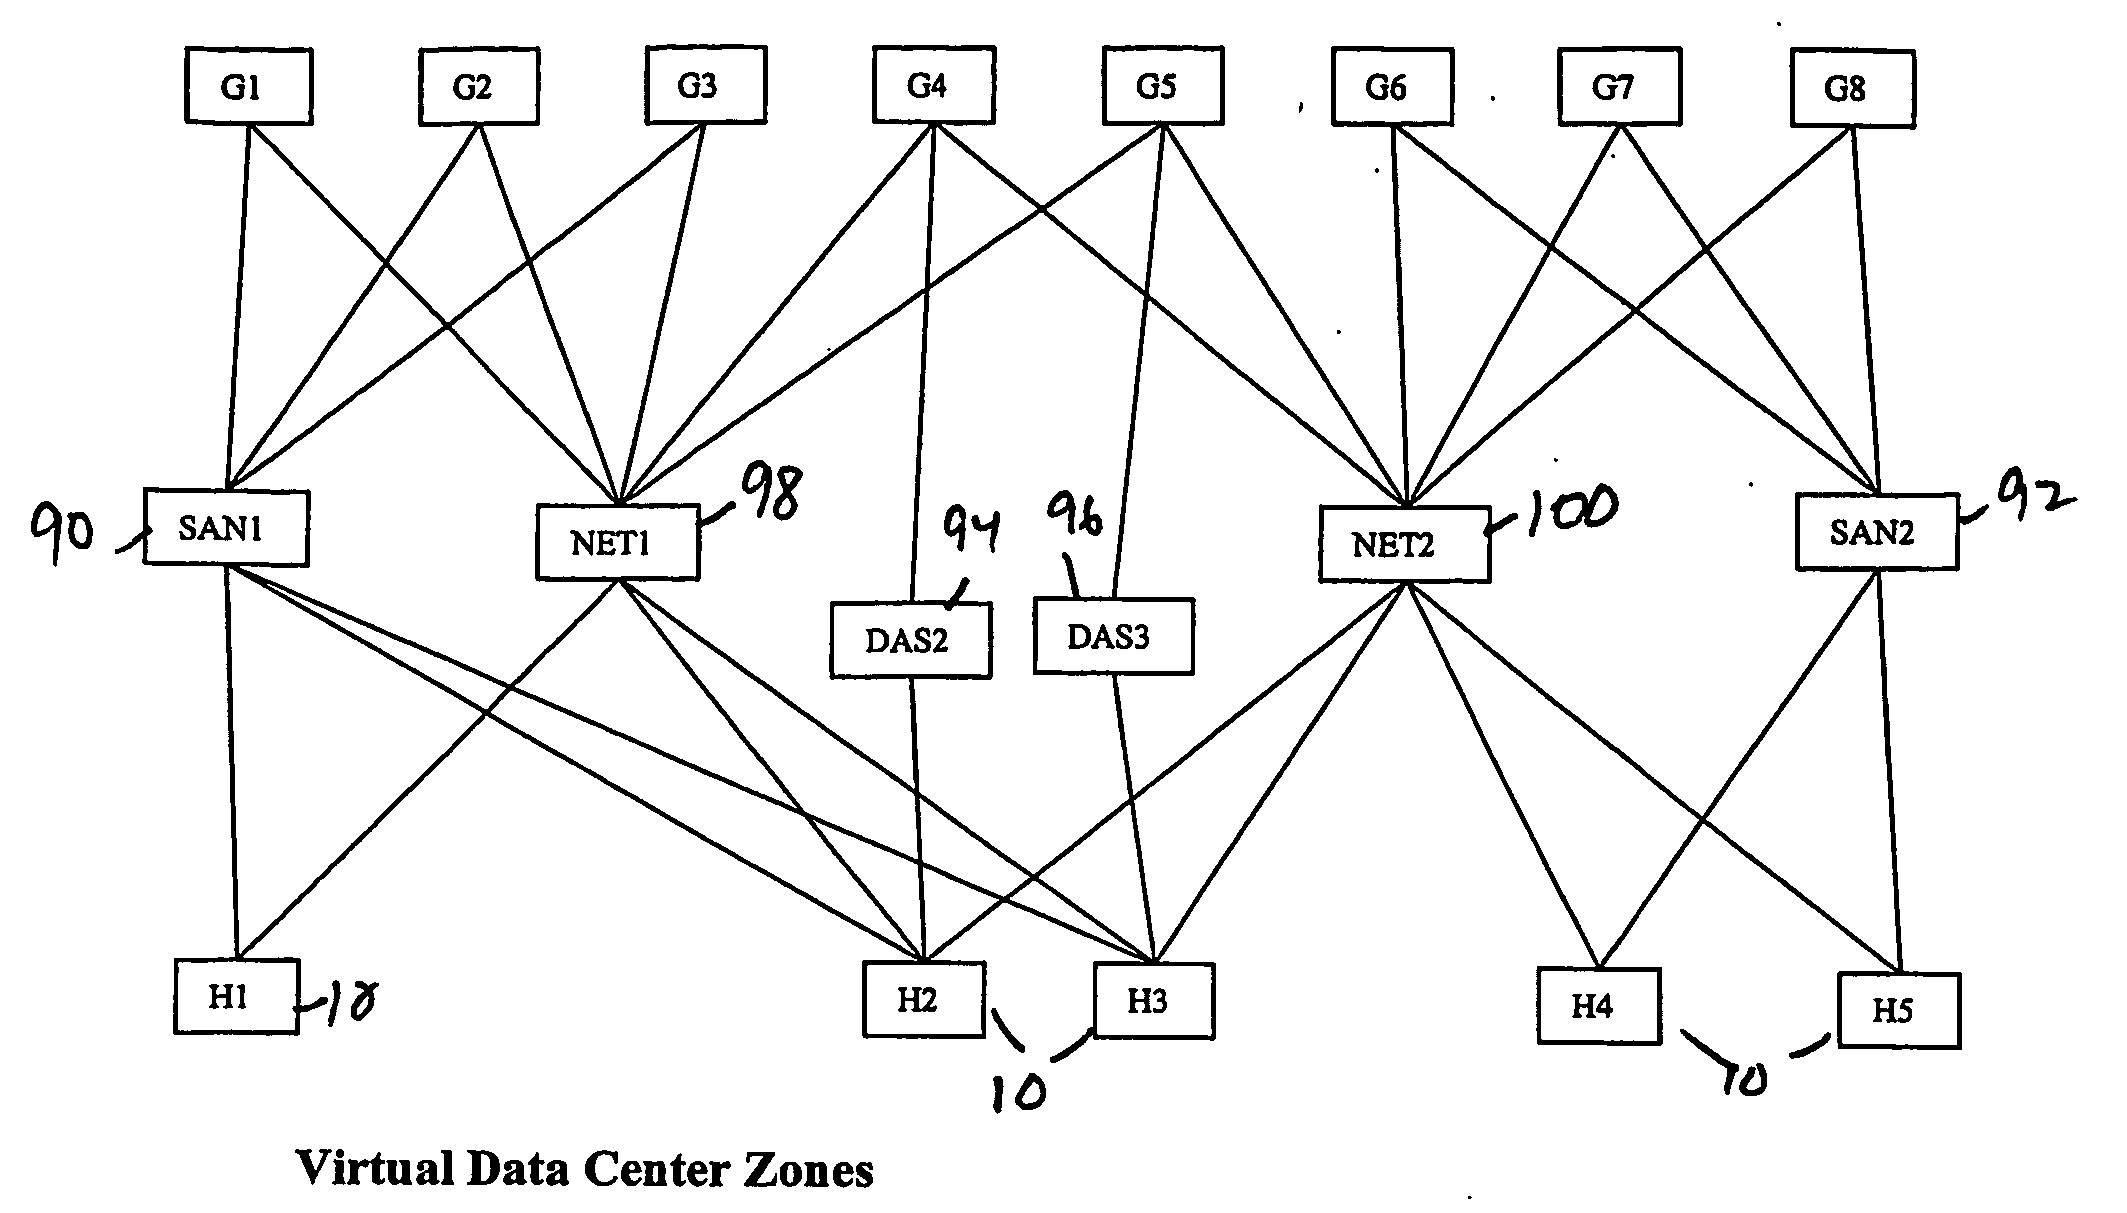 Para-virtualized computer system with I/0 server partitions that map physical host hardware for access by guest partitions